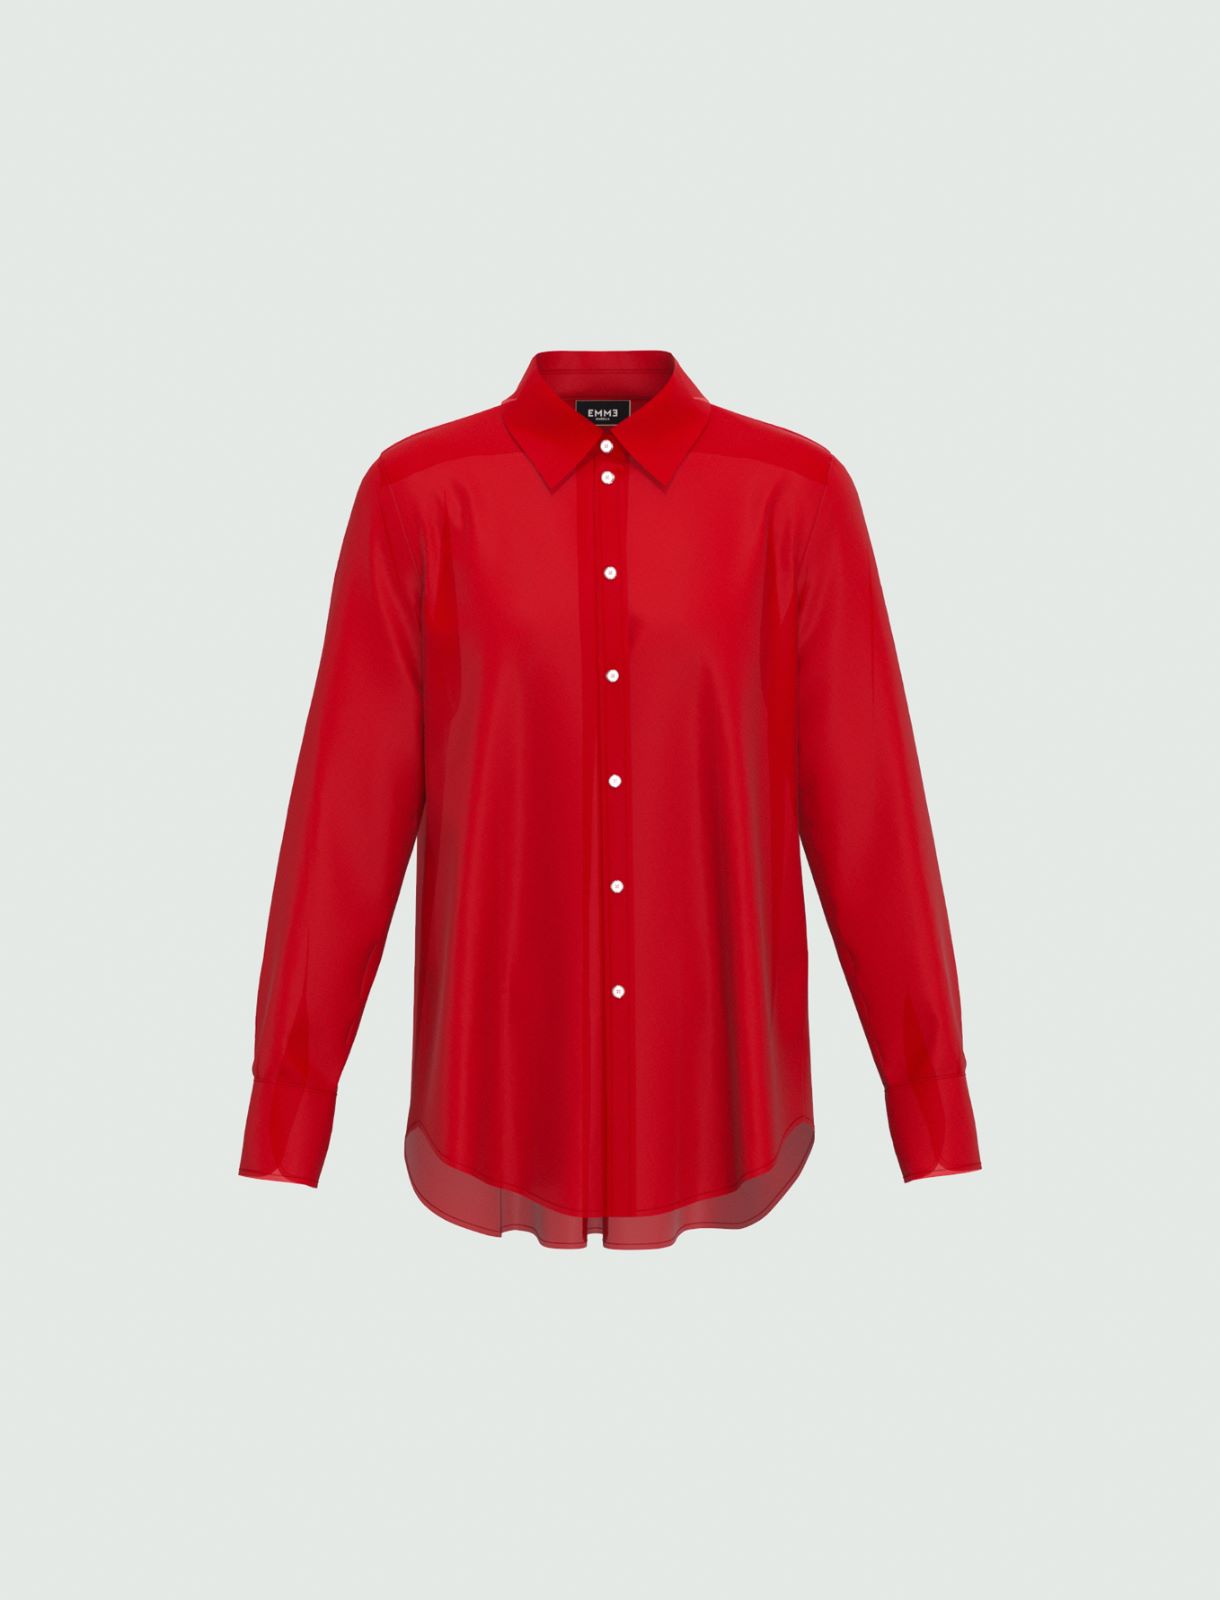 Crepe shirt - Red - Persona